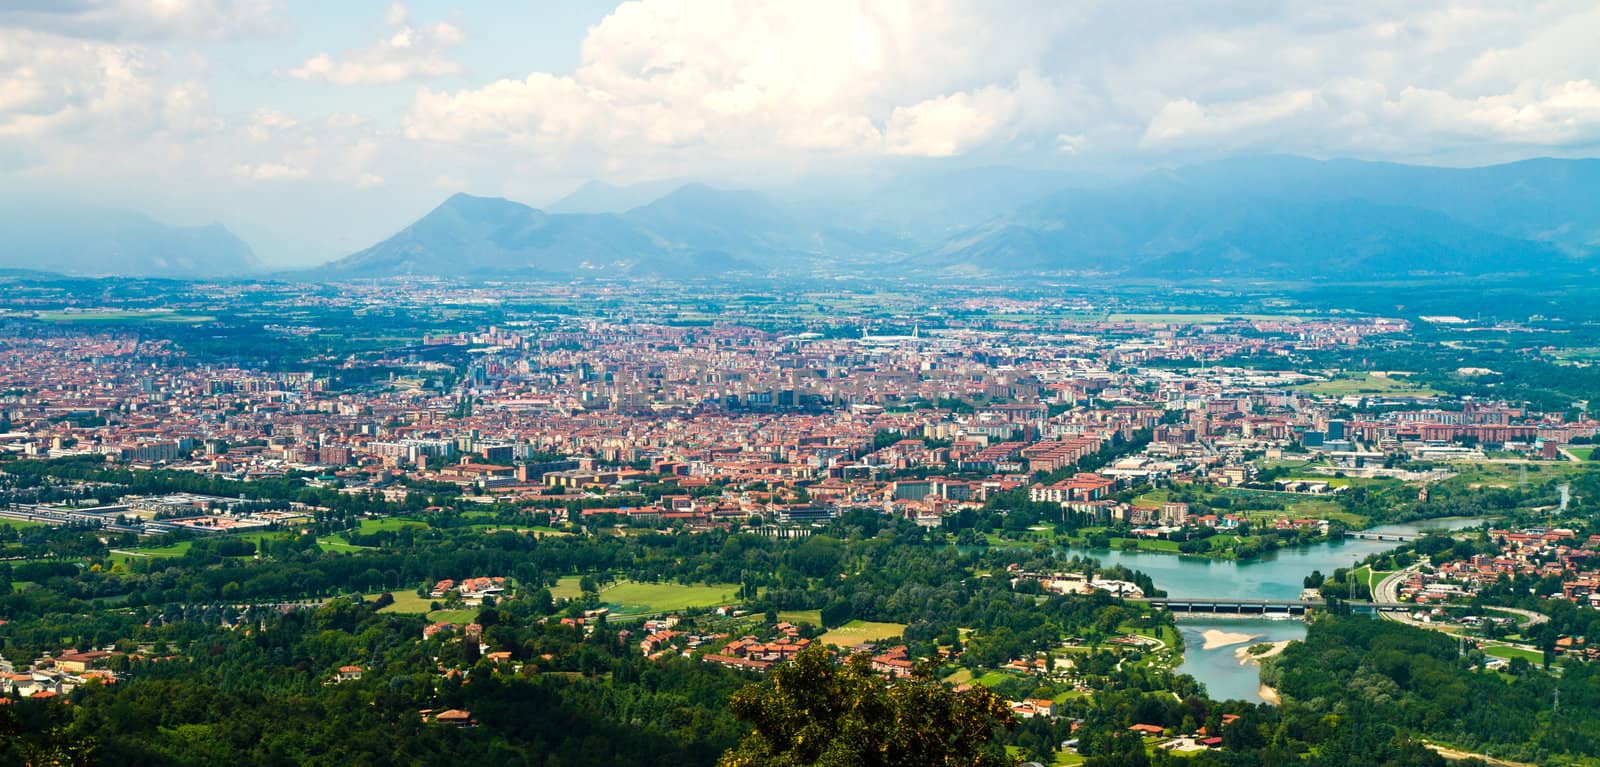 City of Turin  skyline panorama seen from the hill  by lsantilli